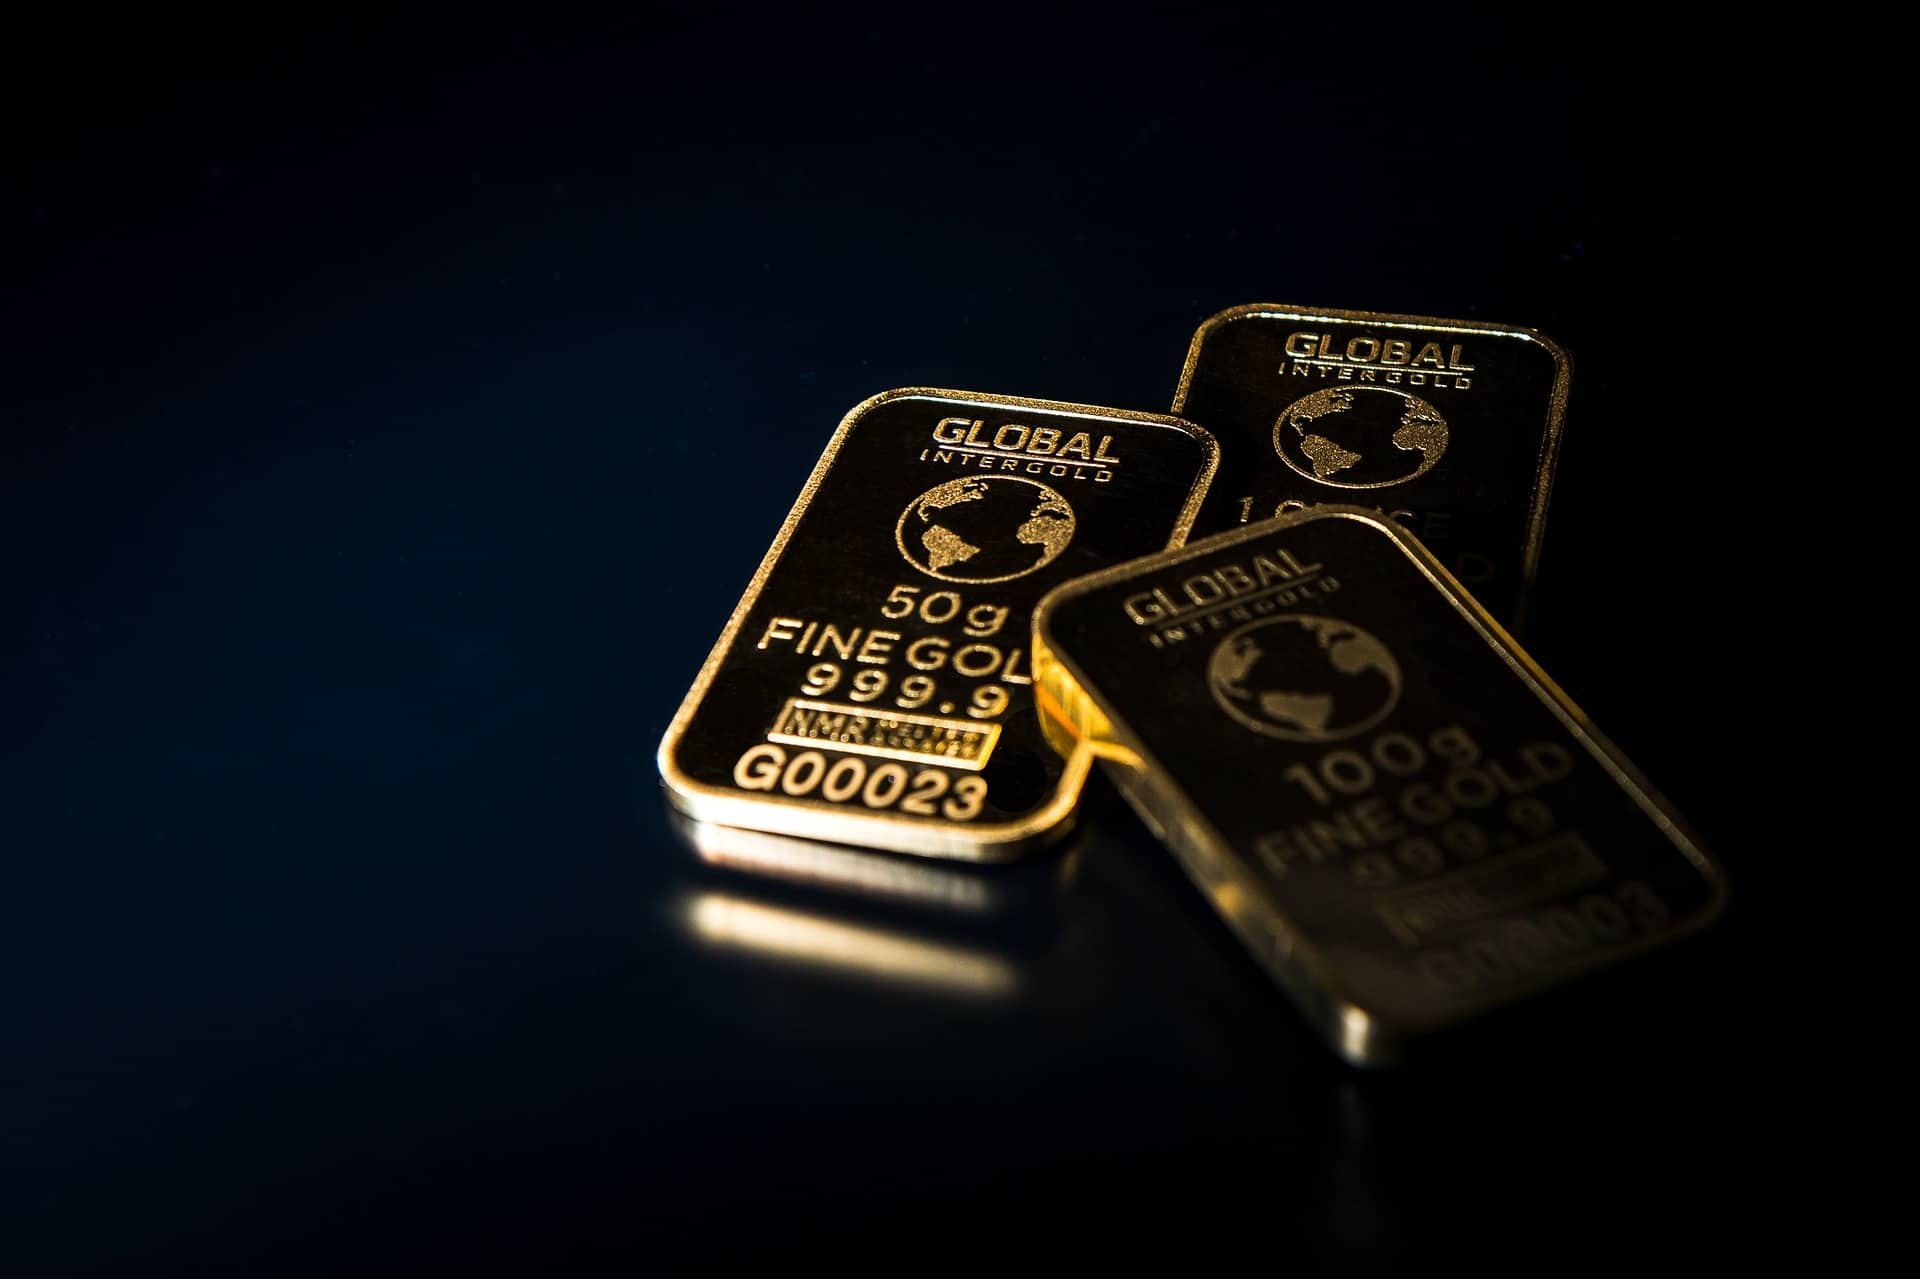 The investment idea is premised on the thesis of a structural opportunity in Gold lending as the market pie expands with customers evolving, noted the brokerage.